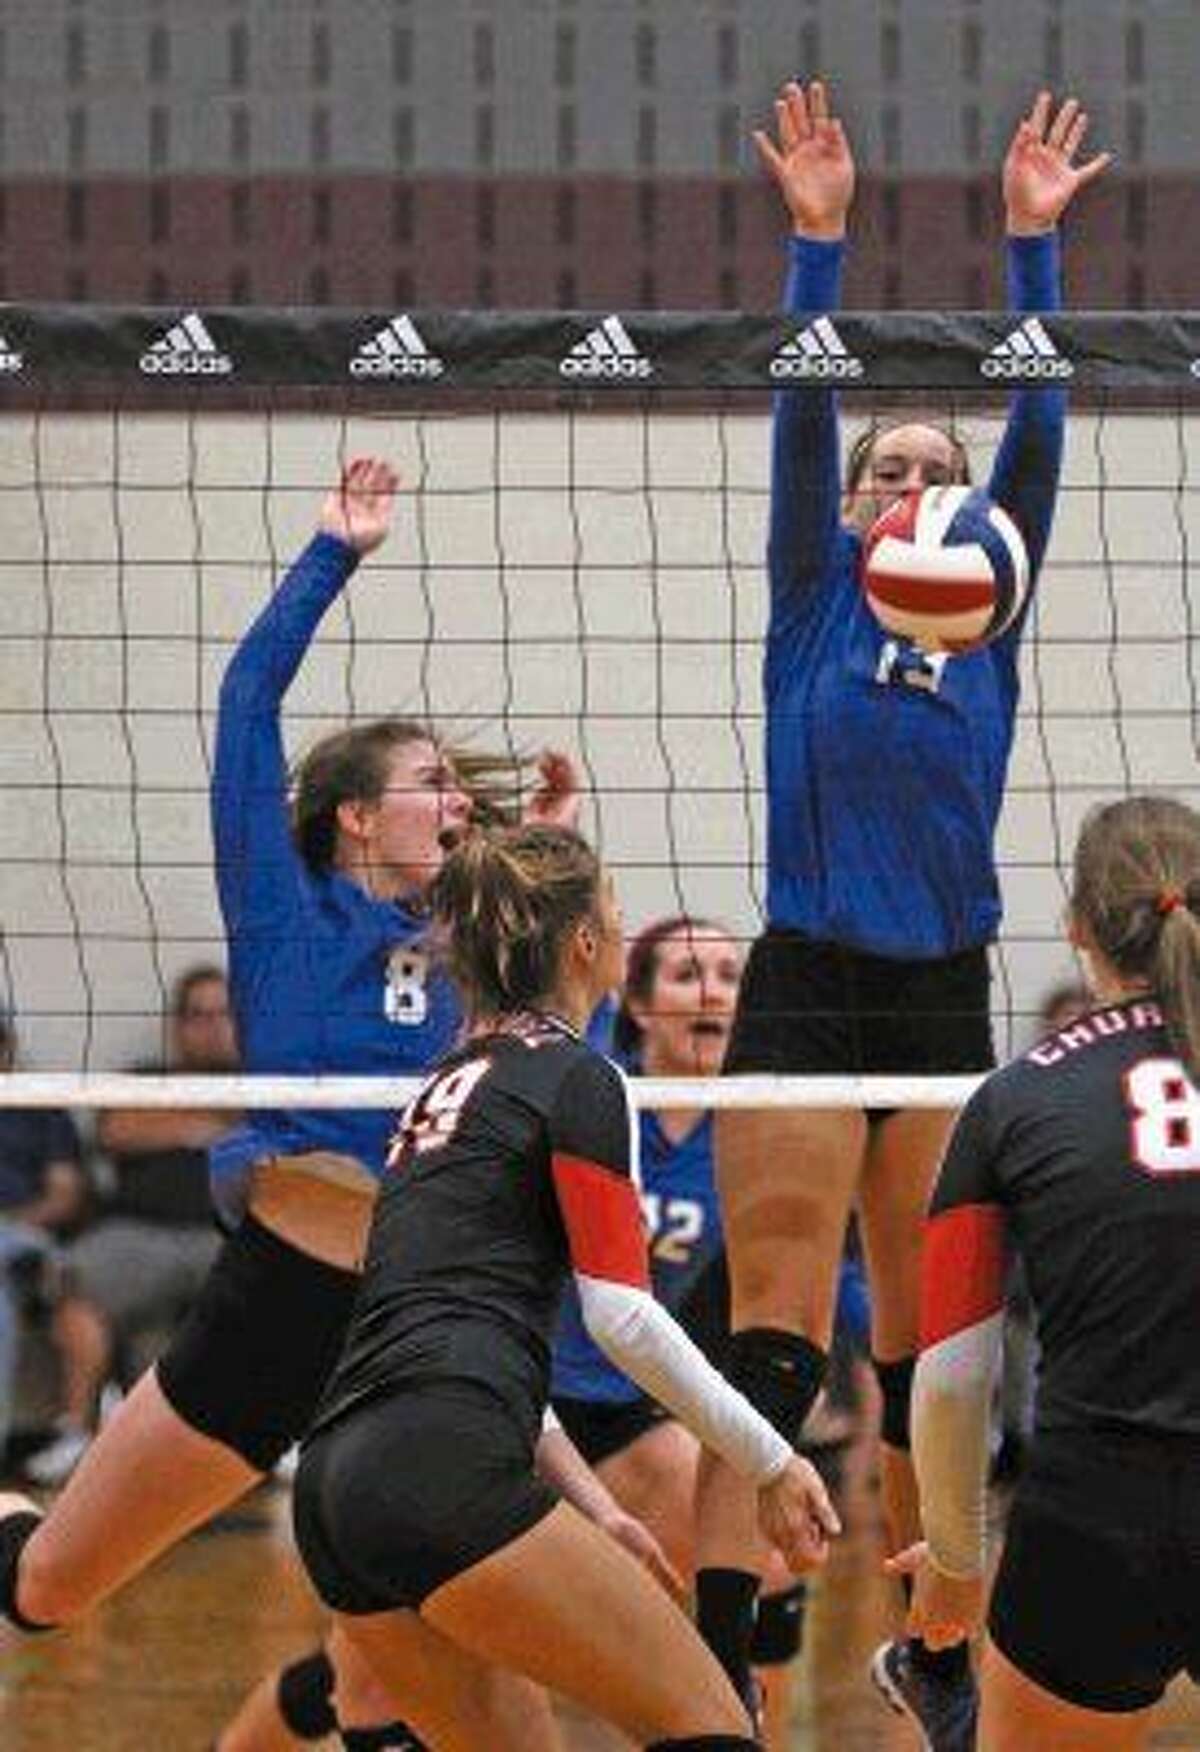 Dalaney Rhoades (13) and Ashlyn Ross (8) of Friendswood defends the net during play at the Adidas Invitational.